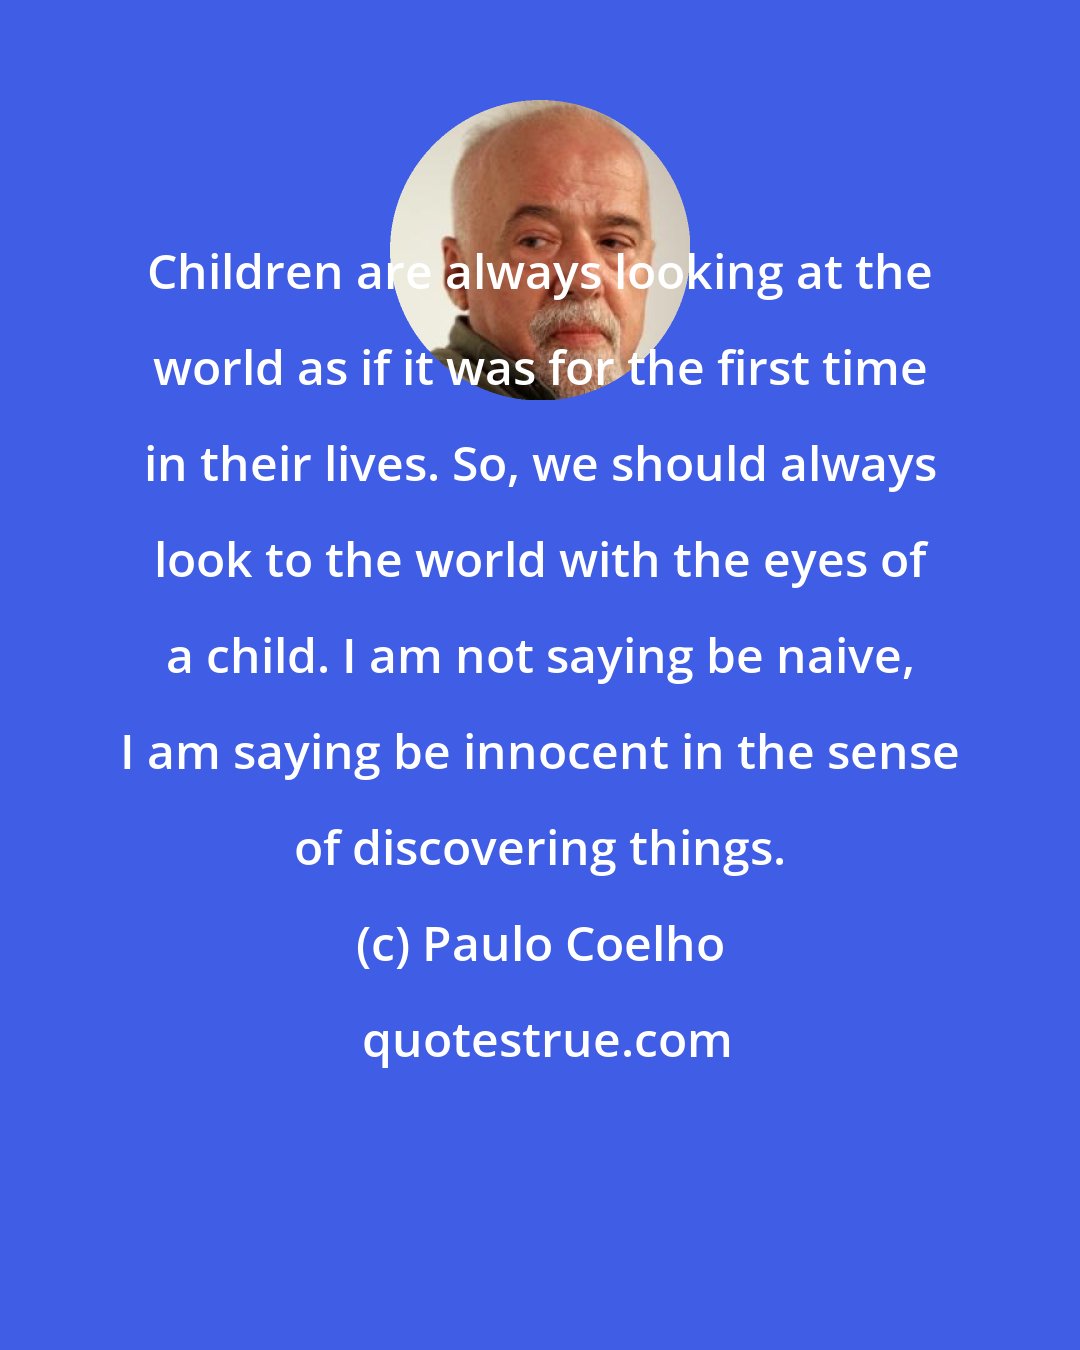 Paulo Coelho: Children are always looking at the world as if it was for the first time in their lives. So, we should always look to the world with the eyes of a child. I am not saying be naive, I am saying be innocent in the sense of discovering things.